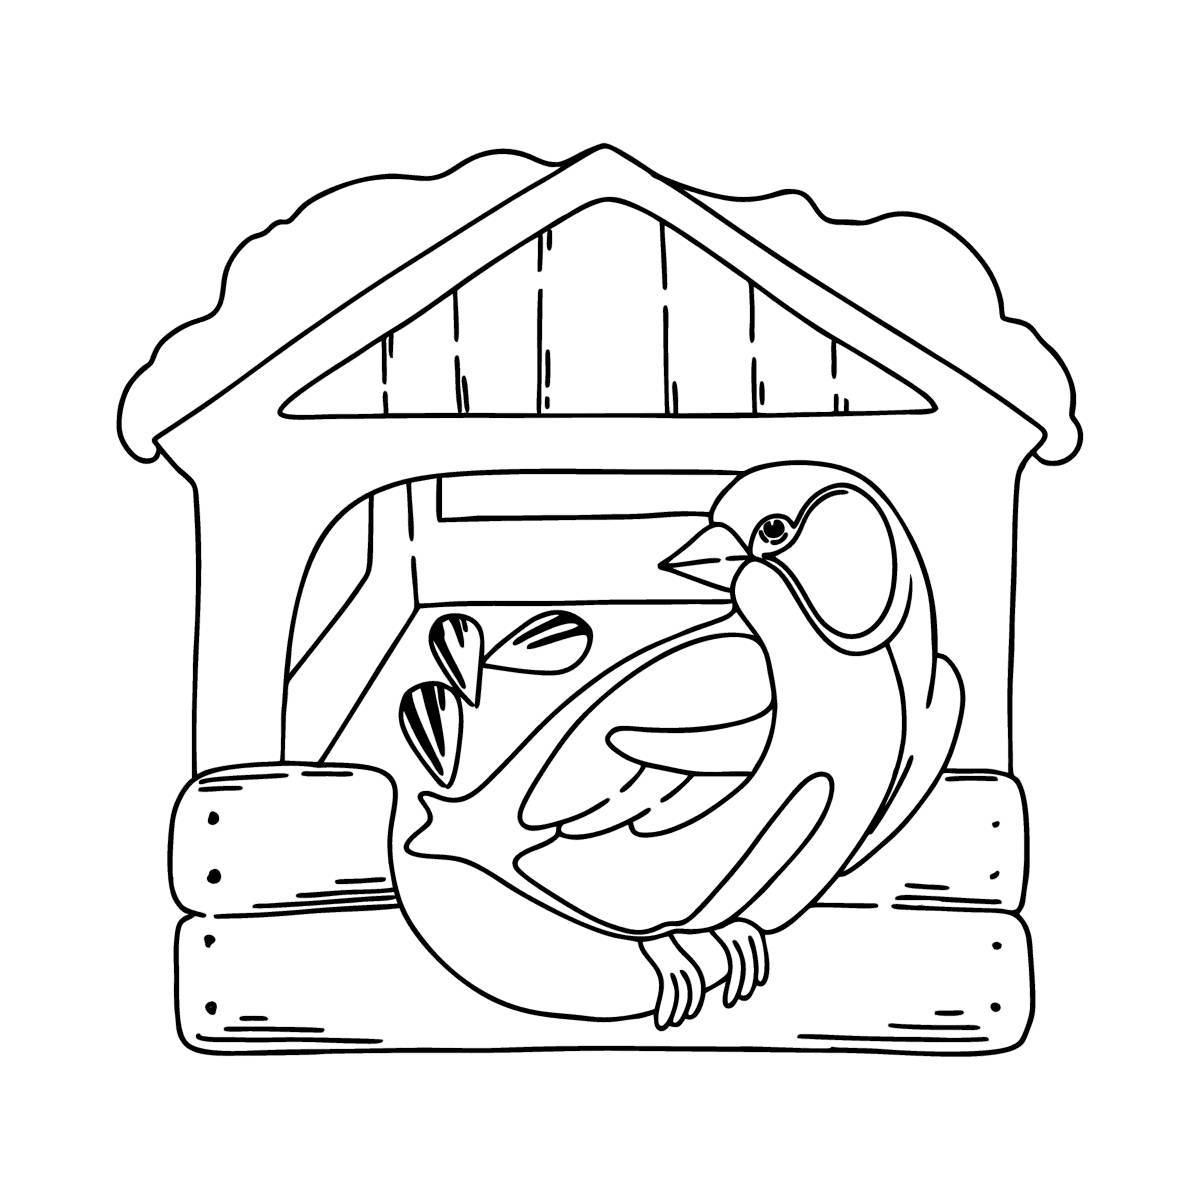 Fine feeder coloring page